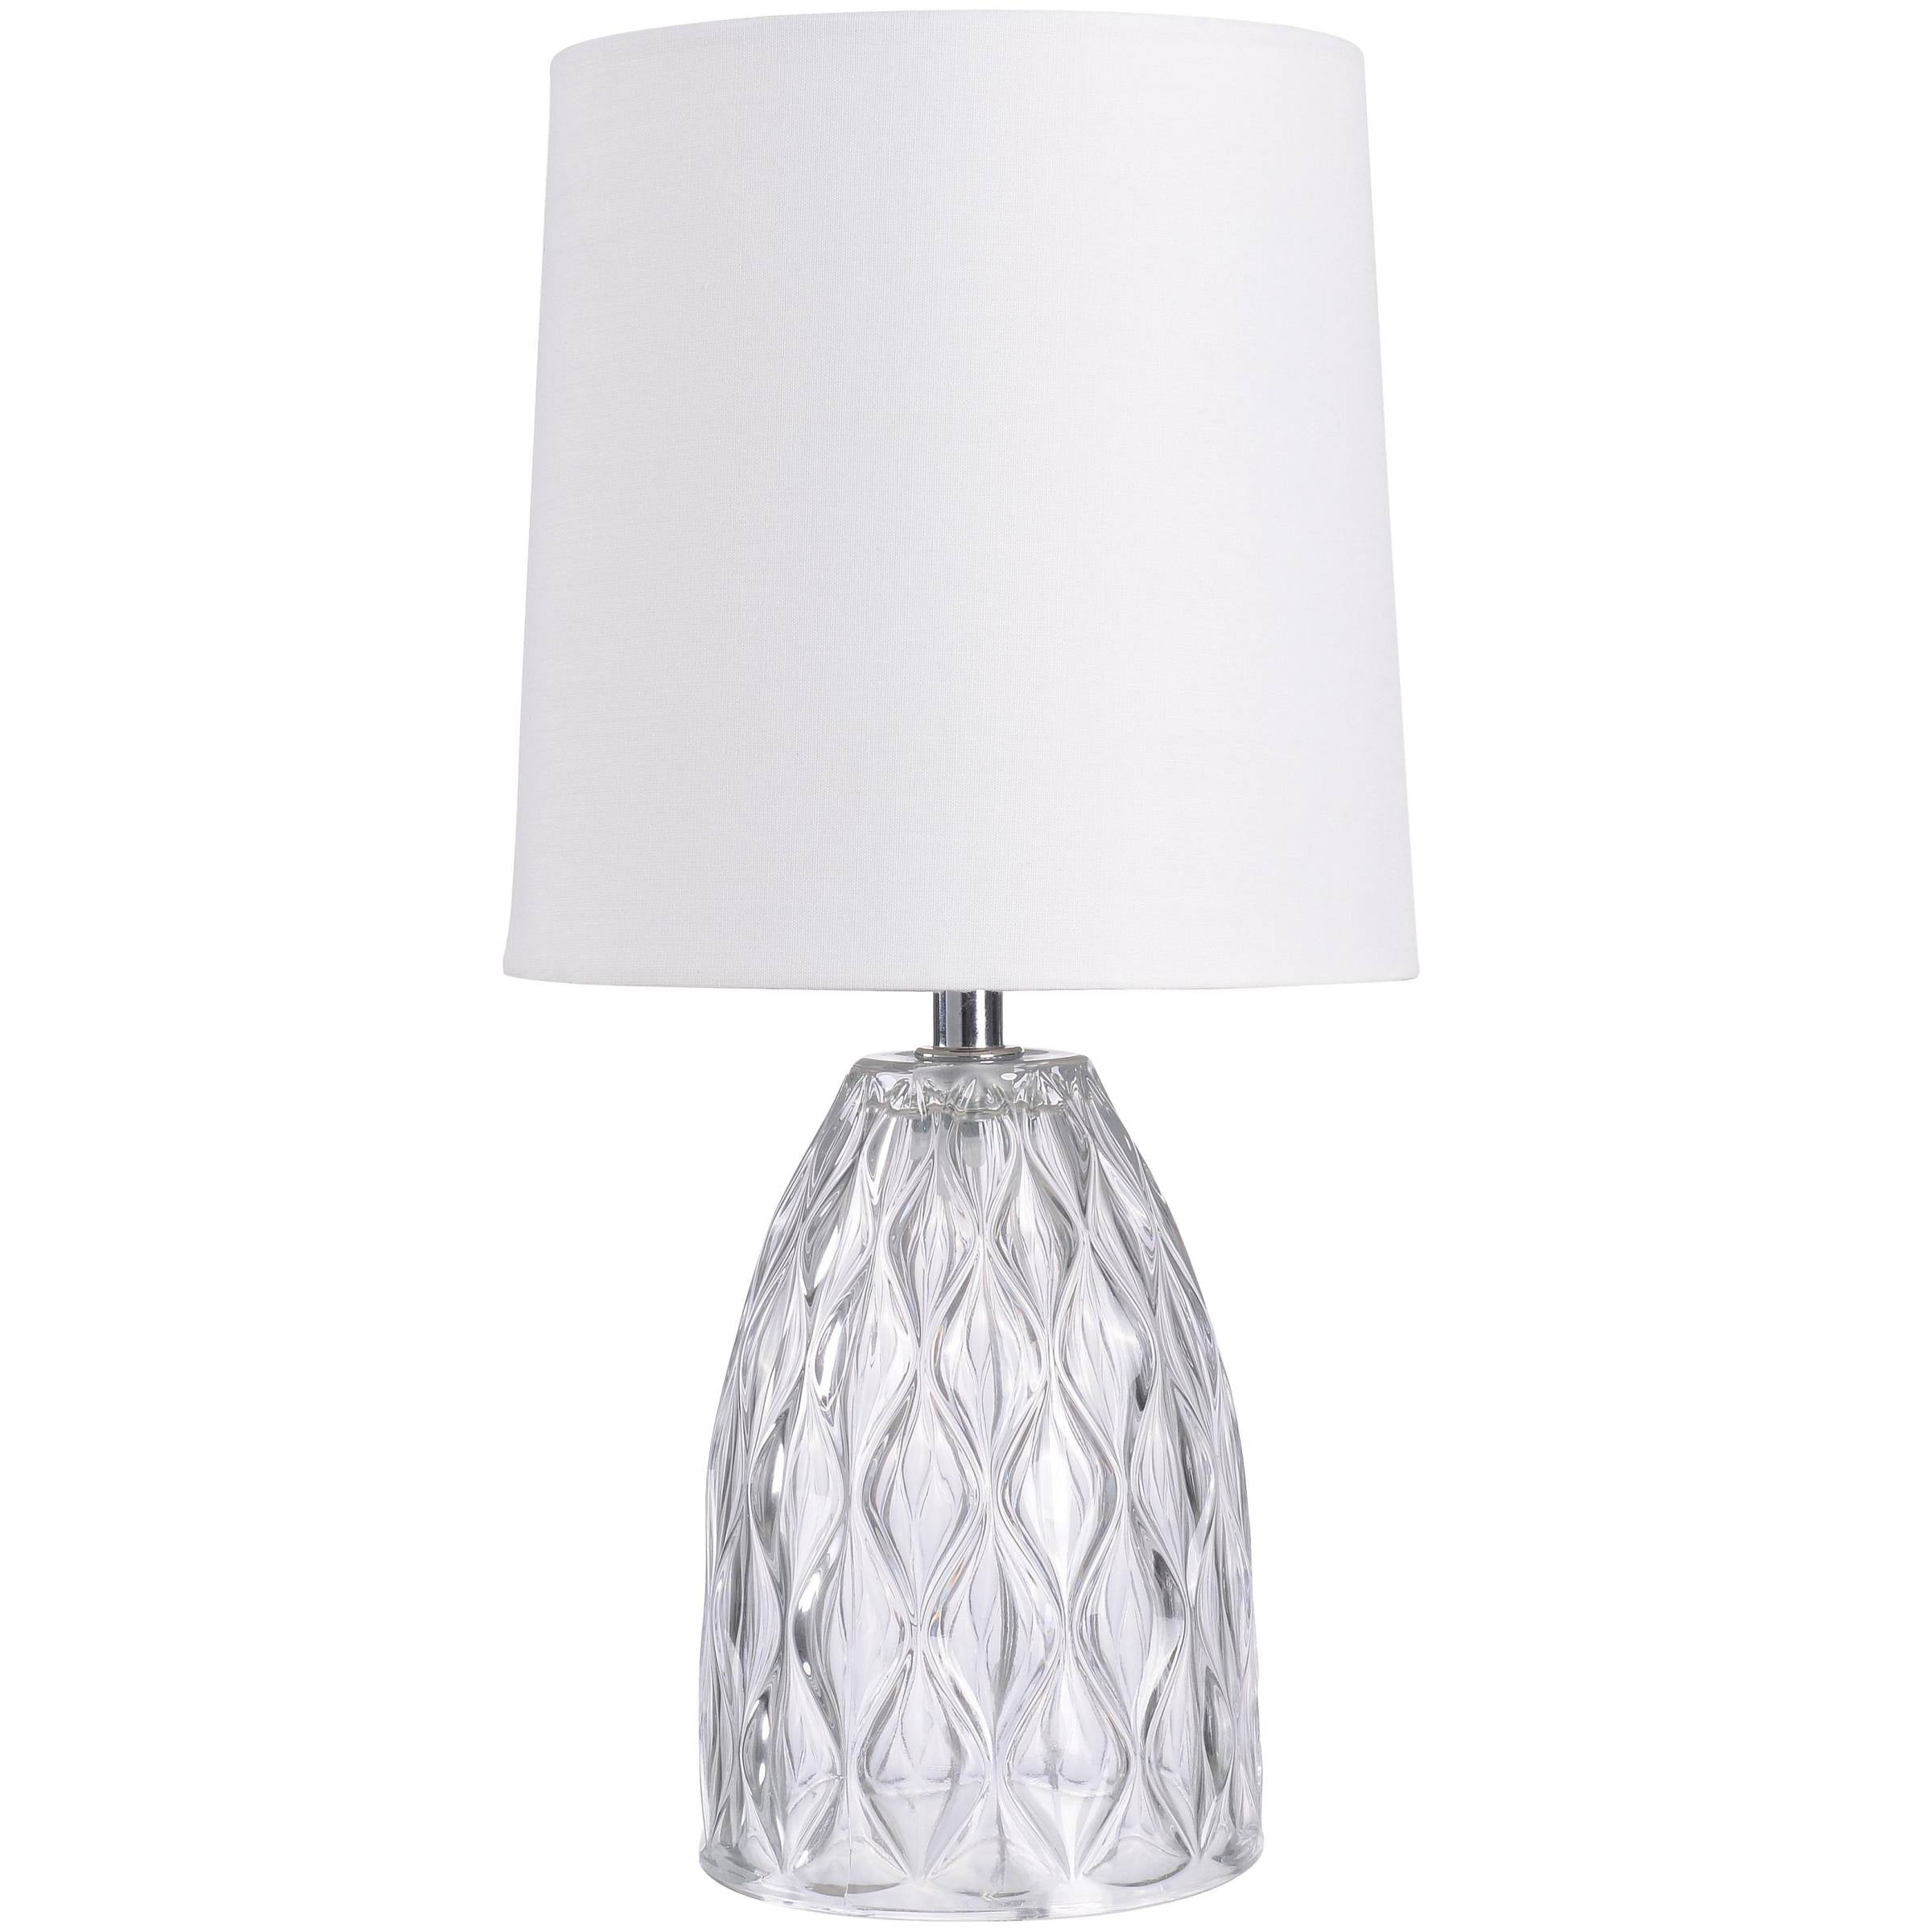 Mainstays Mini Clear Glass Table Lamp with Shade 12.75"H-Geo Texture & Glossy Finish